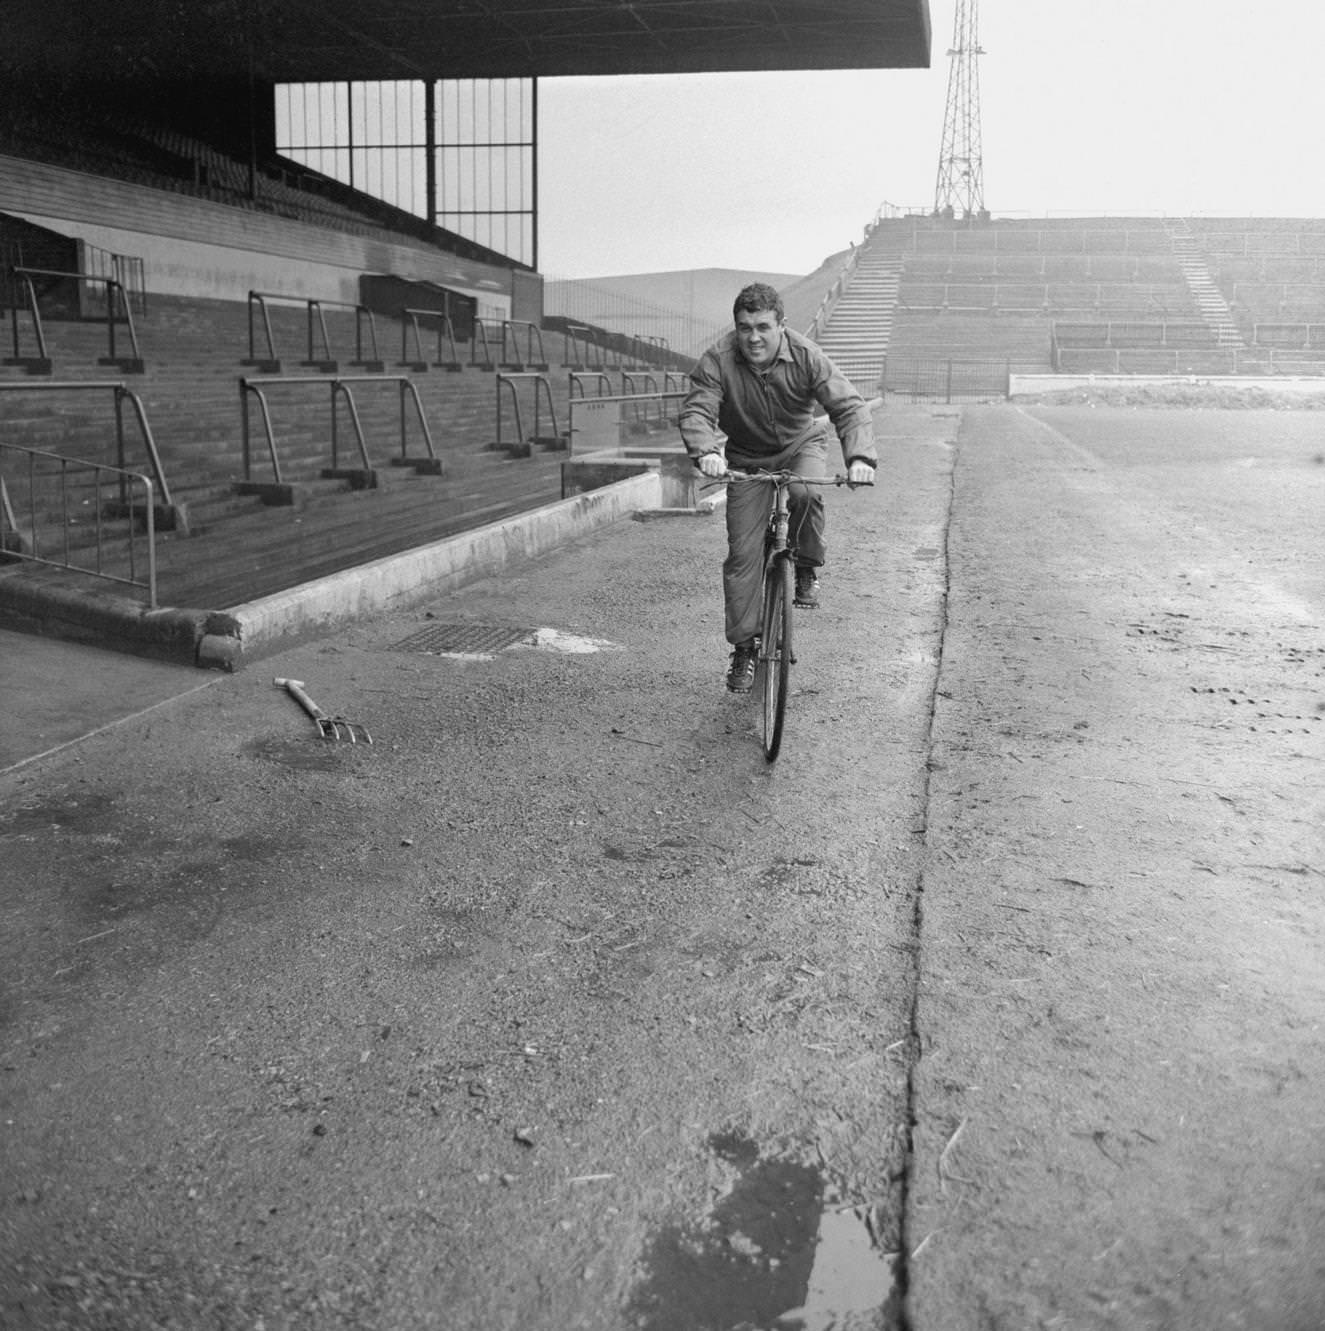 Leeds United and Scotland international Bobby Collins in training on a bike at Elland Road, 1960